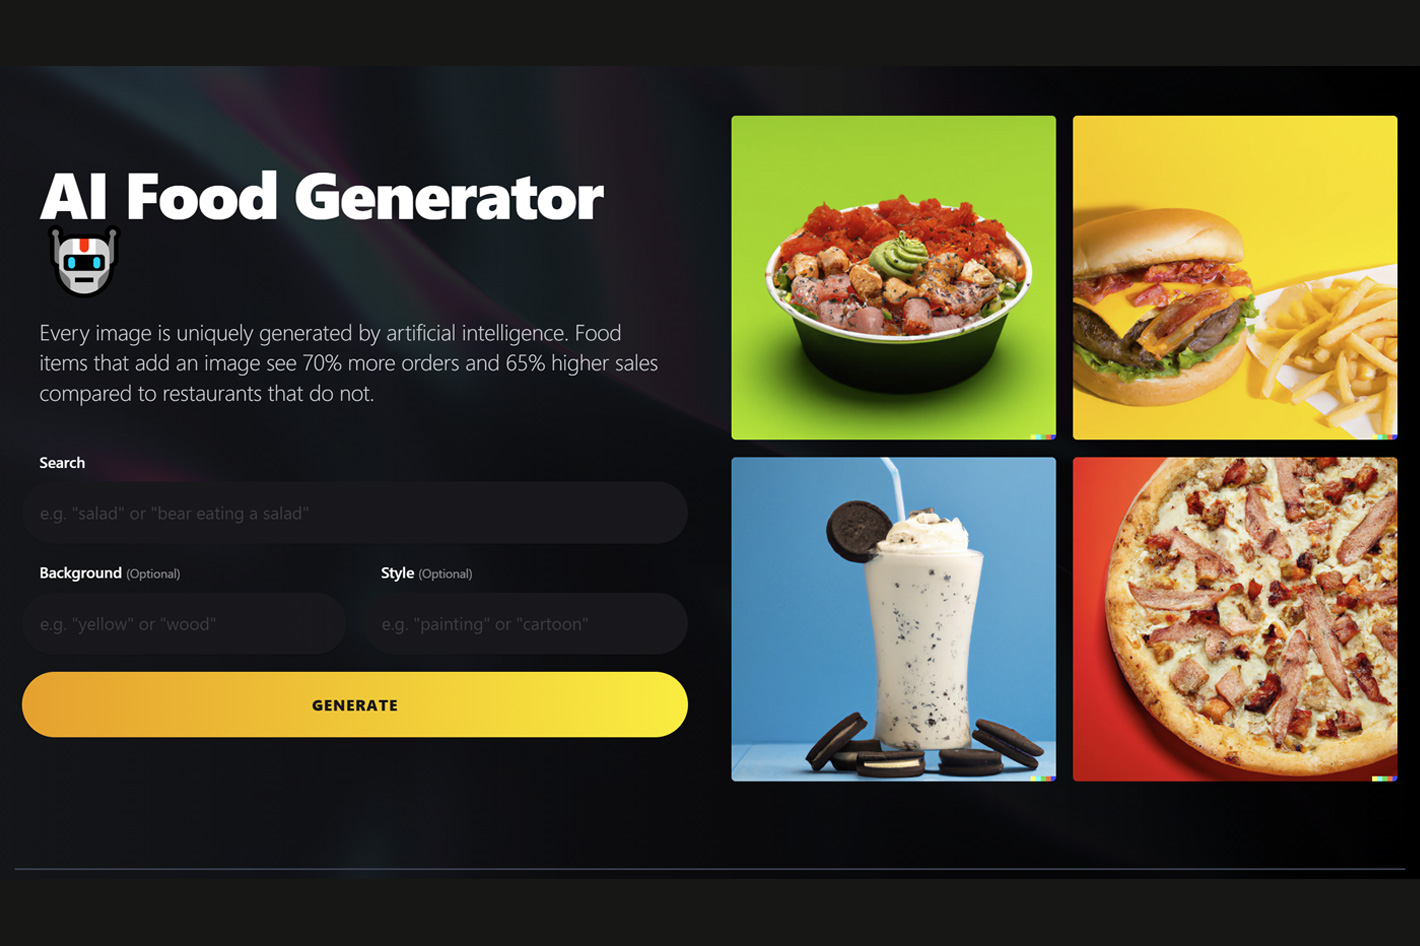 Lunchbox's AI Food Generator: some food for thought!